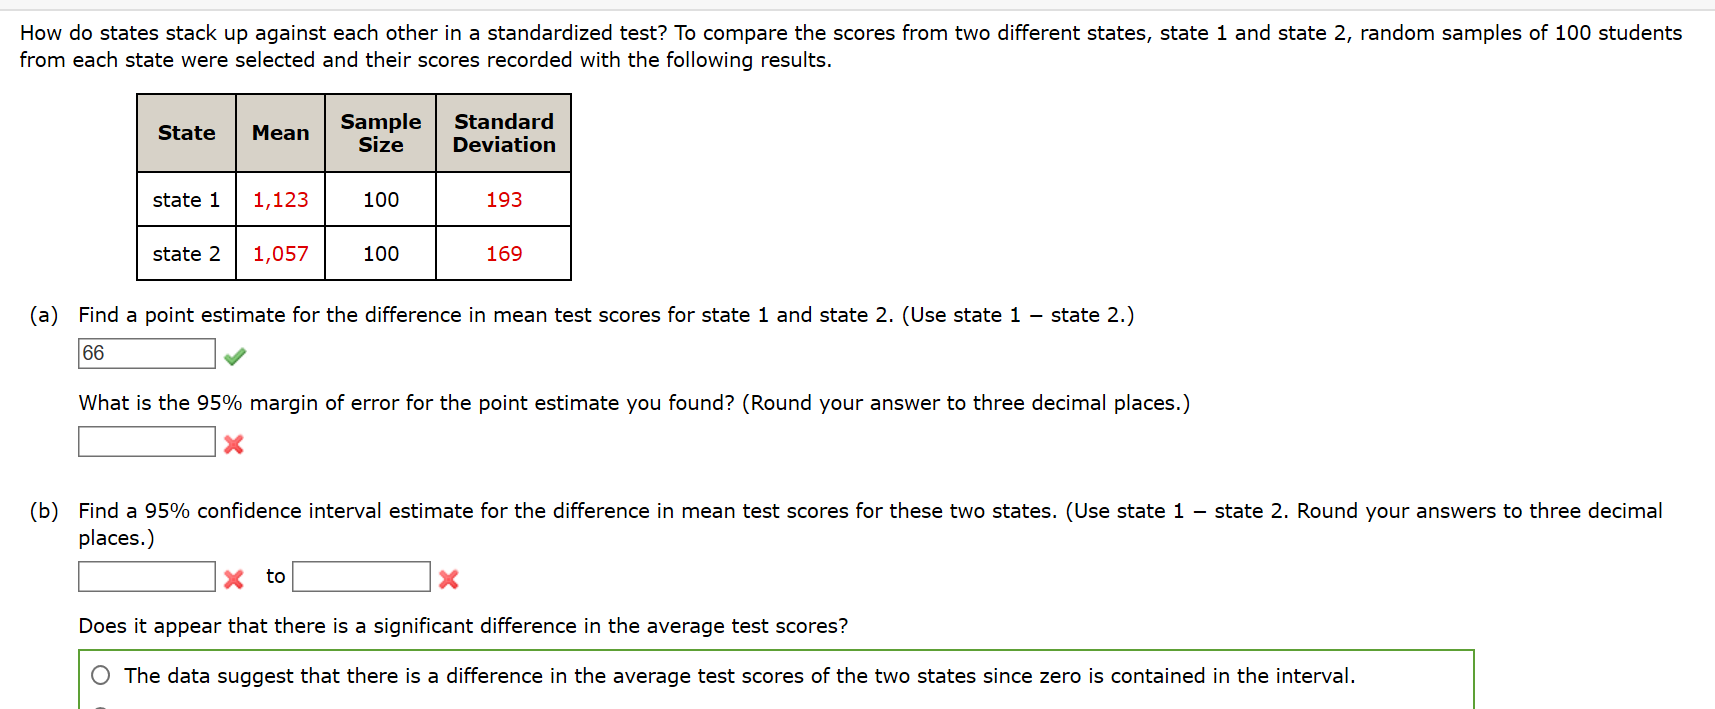 How do states stack up against each other in a standardized test? To compare the scores from two different states, state 1 and state 2, random samples of 100 students
from each state were selected and their scores recorded with the following results.
Sample
Size
Standard
Deviation
State
Mean
state 1
1,123
100
193
state 2
1,057
100
169
(a) Find a point estimate for the difference in mean test scores for state 1 and state 2. (Use state 1 - state 2.)
66
What is the 95% margin of error for the point estimate you found? (Round your answer to three decimal places.)
(b) Find a 95% confidence interval estimate for the difference in mean test scores for these two states. (Use state 1 – state 2. Round your answers to three decimal
places.)
X to
Does it appear that there is a significant difference in the average test scores?
The data suggest that there is a difference in the average test scores of the two states since zero is contained in the interval.
